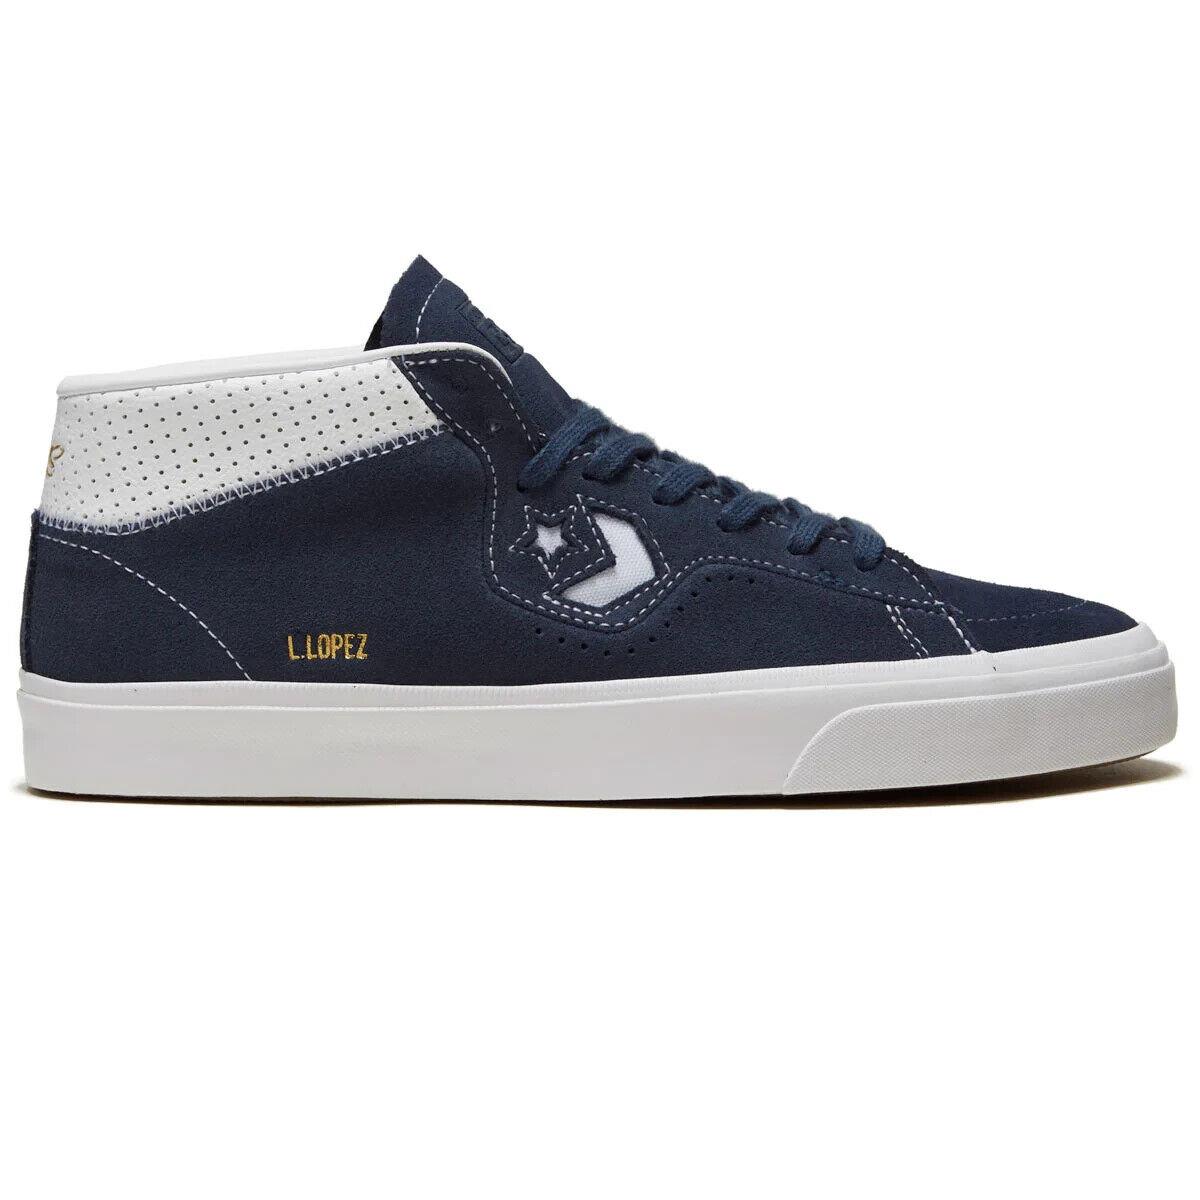 Converse Cons Louie Lopez Pro Mid Navy/white/navy A06235C Skate Shoes - NAVY